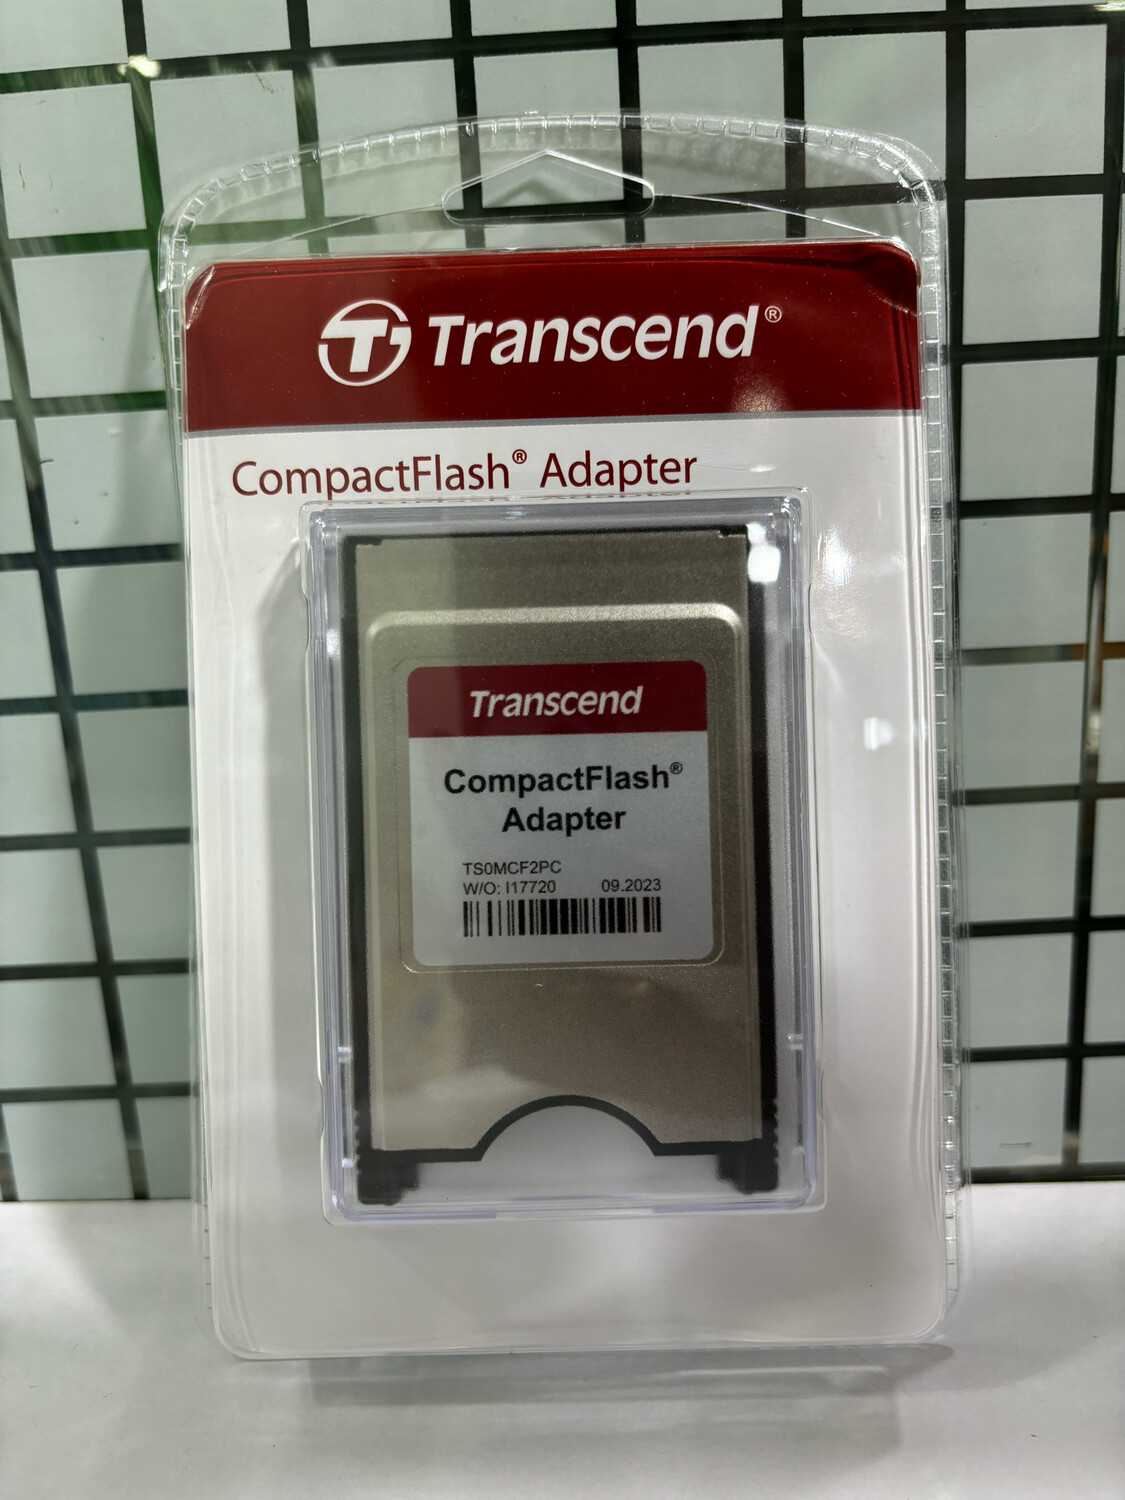 Transcend Compact Flash Adapter